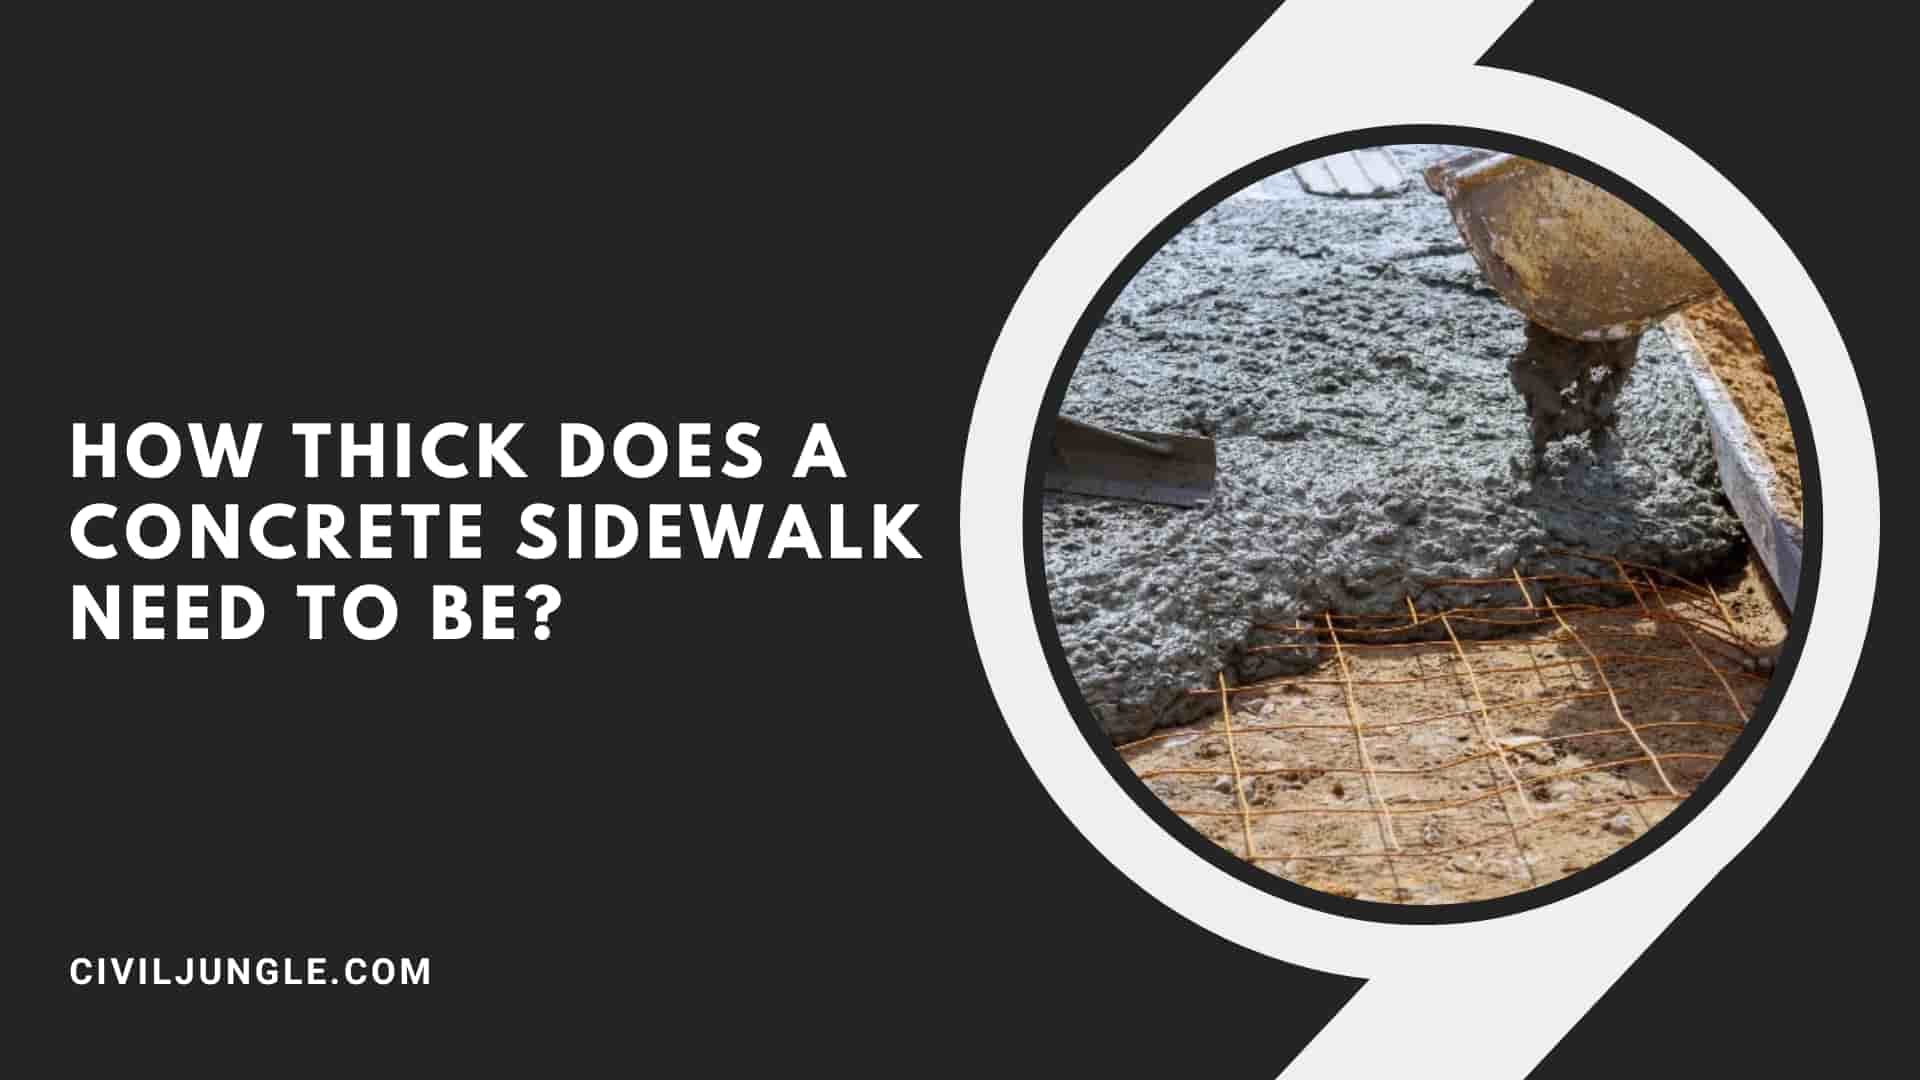 How Thick Does a Concrete Sidewalk Need to Be?